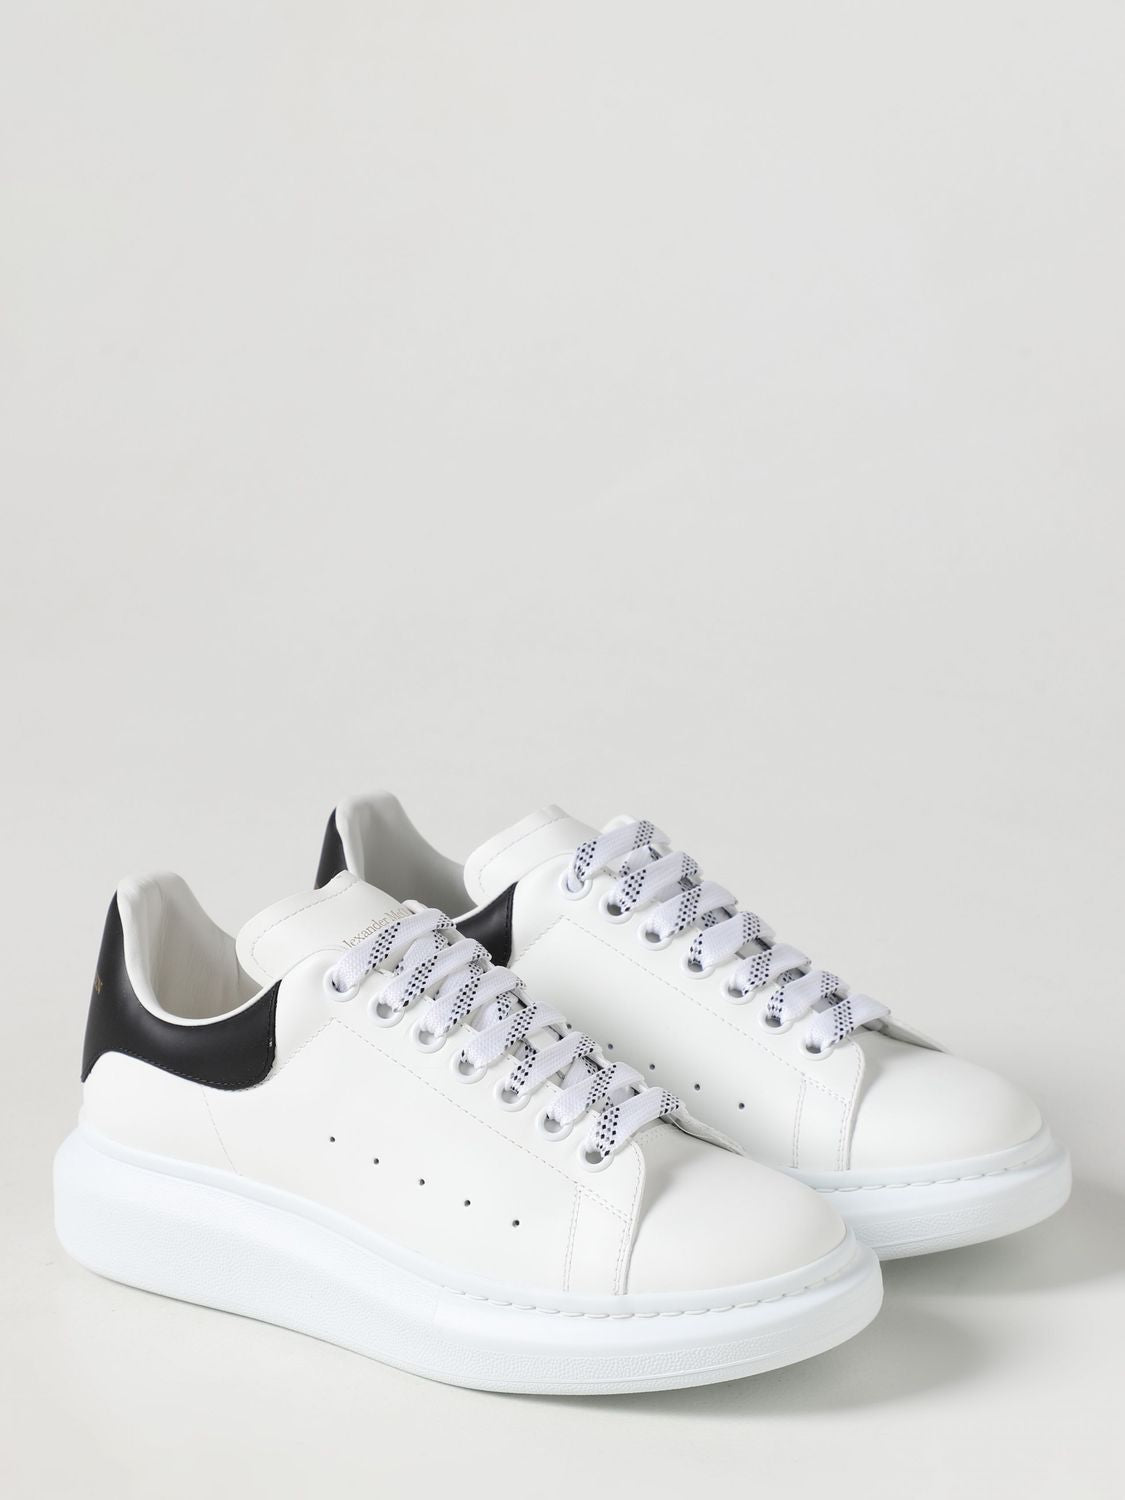 Men's White Leather Oversized Sneakers with Black Accents